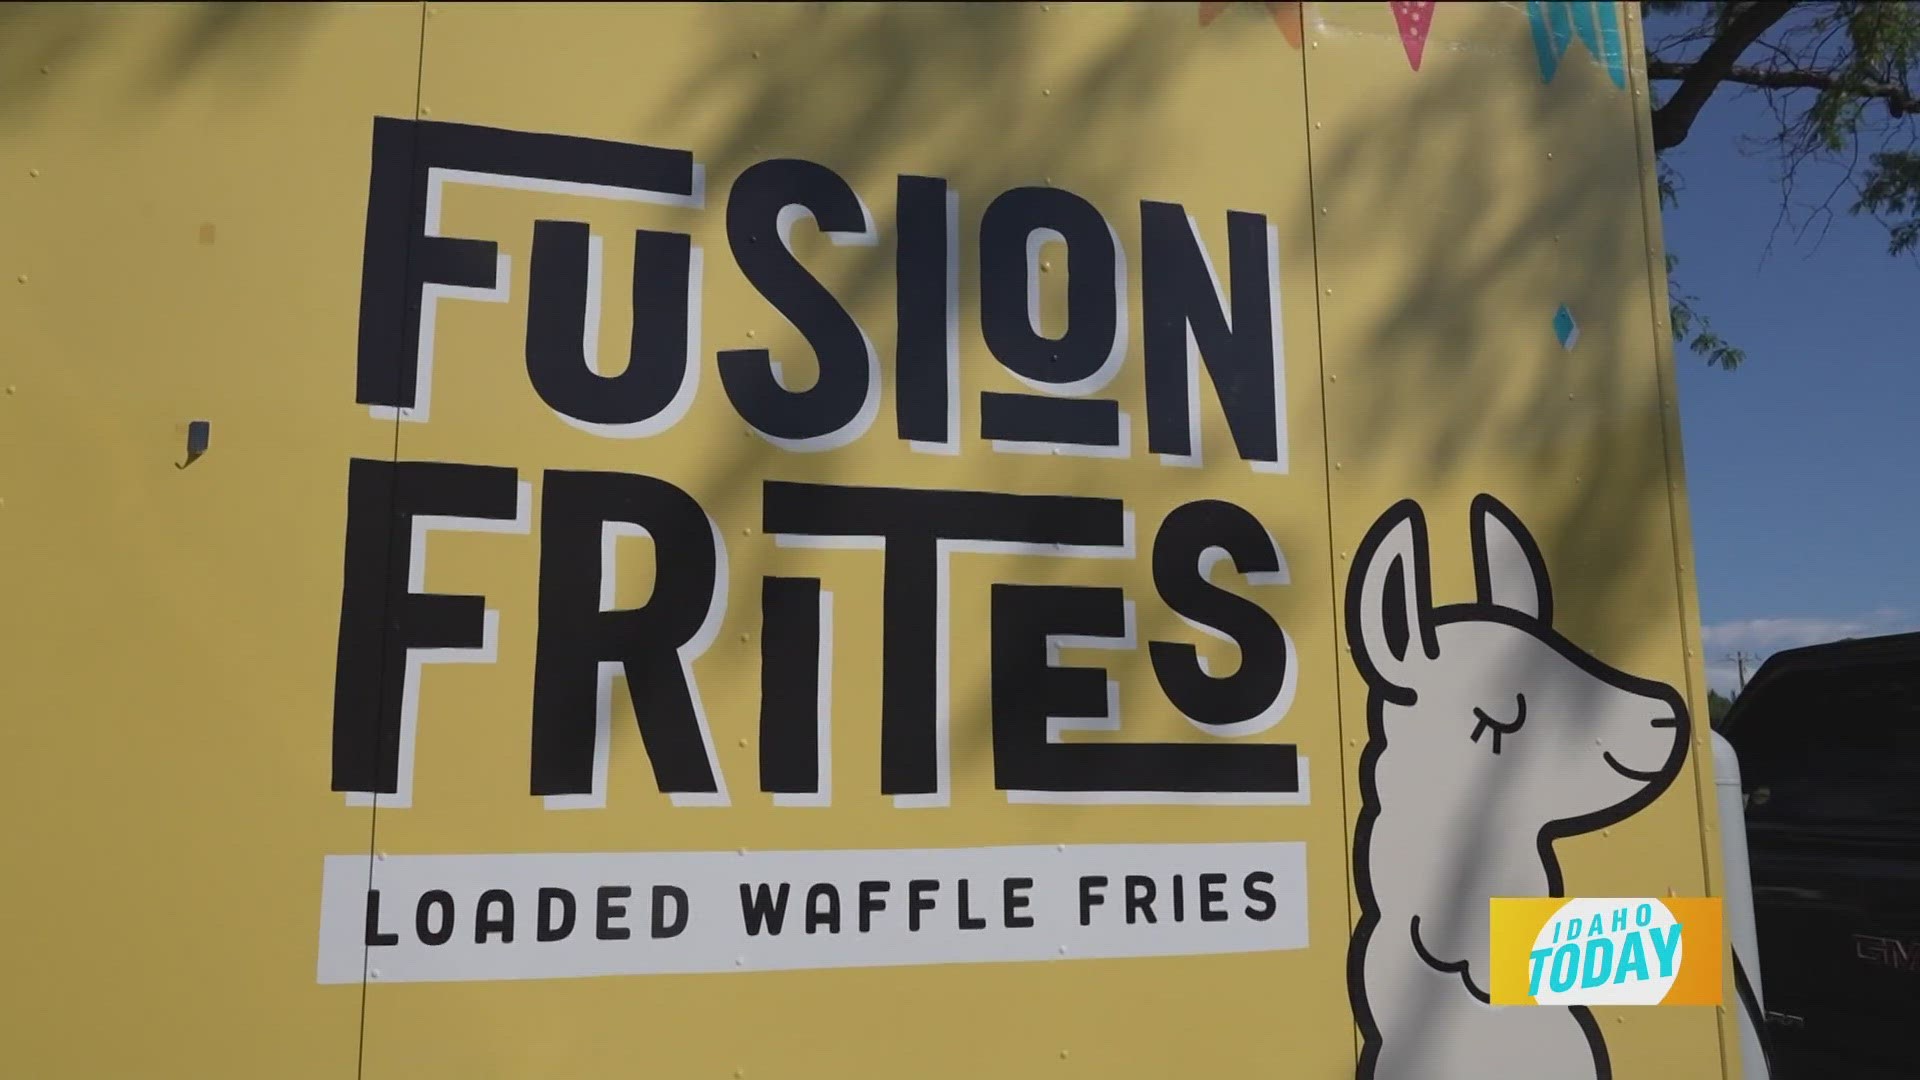 Dean and Christine Hummer, co-owners of Fusion Frites stopped by to serve up lunch, Fusion Frites specializes in loaded waffle fries in the Treasure Valley.